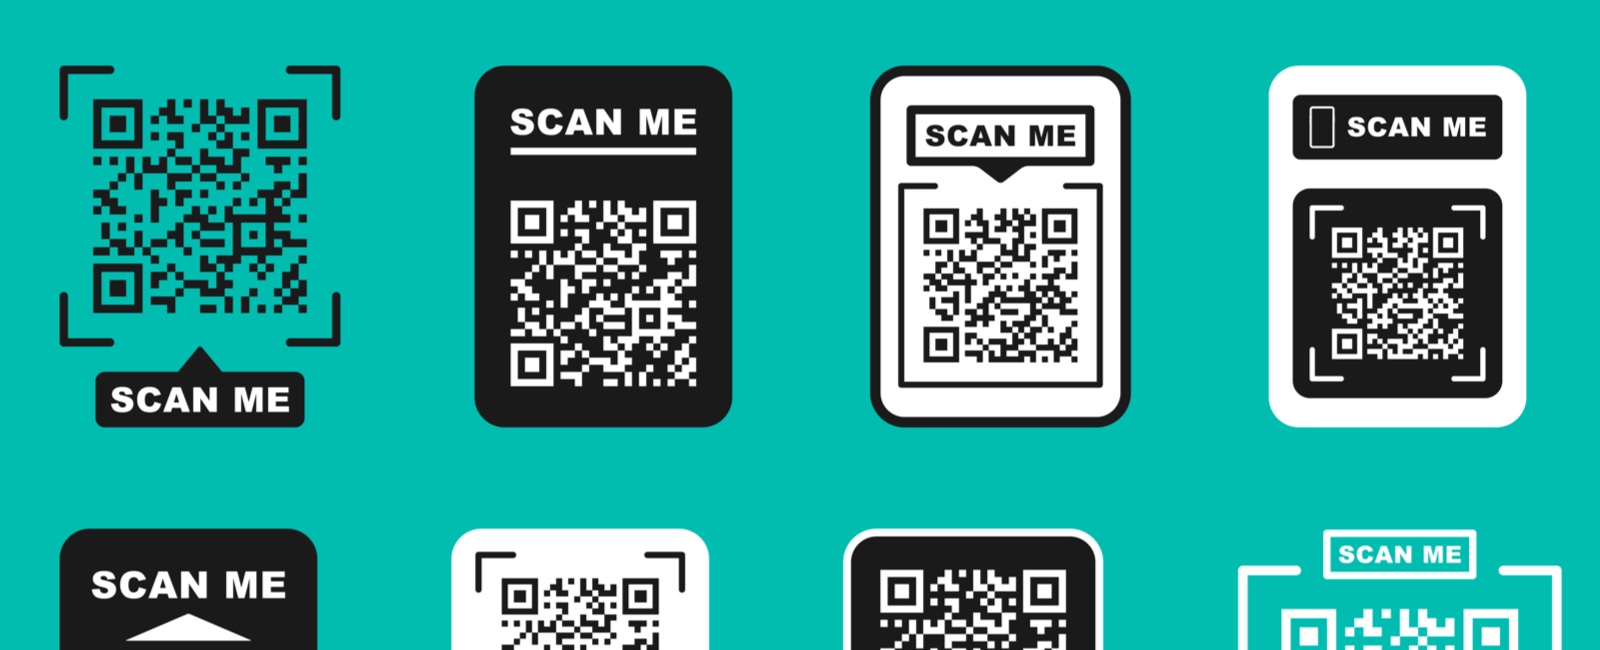 8 Ways to Use QR Codes in Higher Education Classrooms